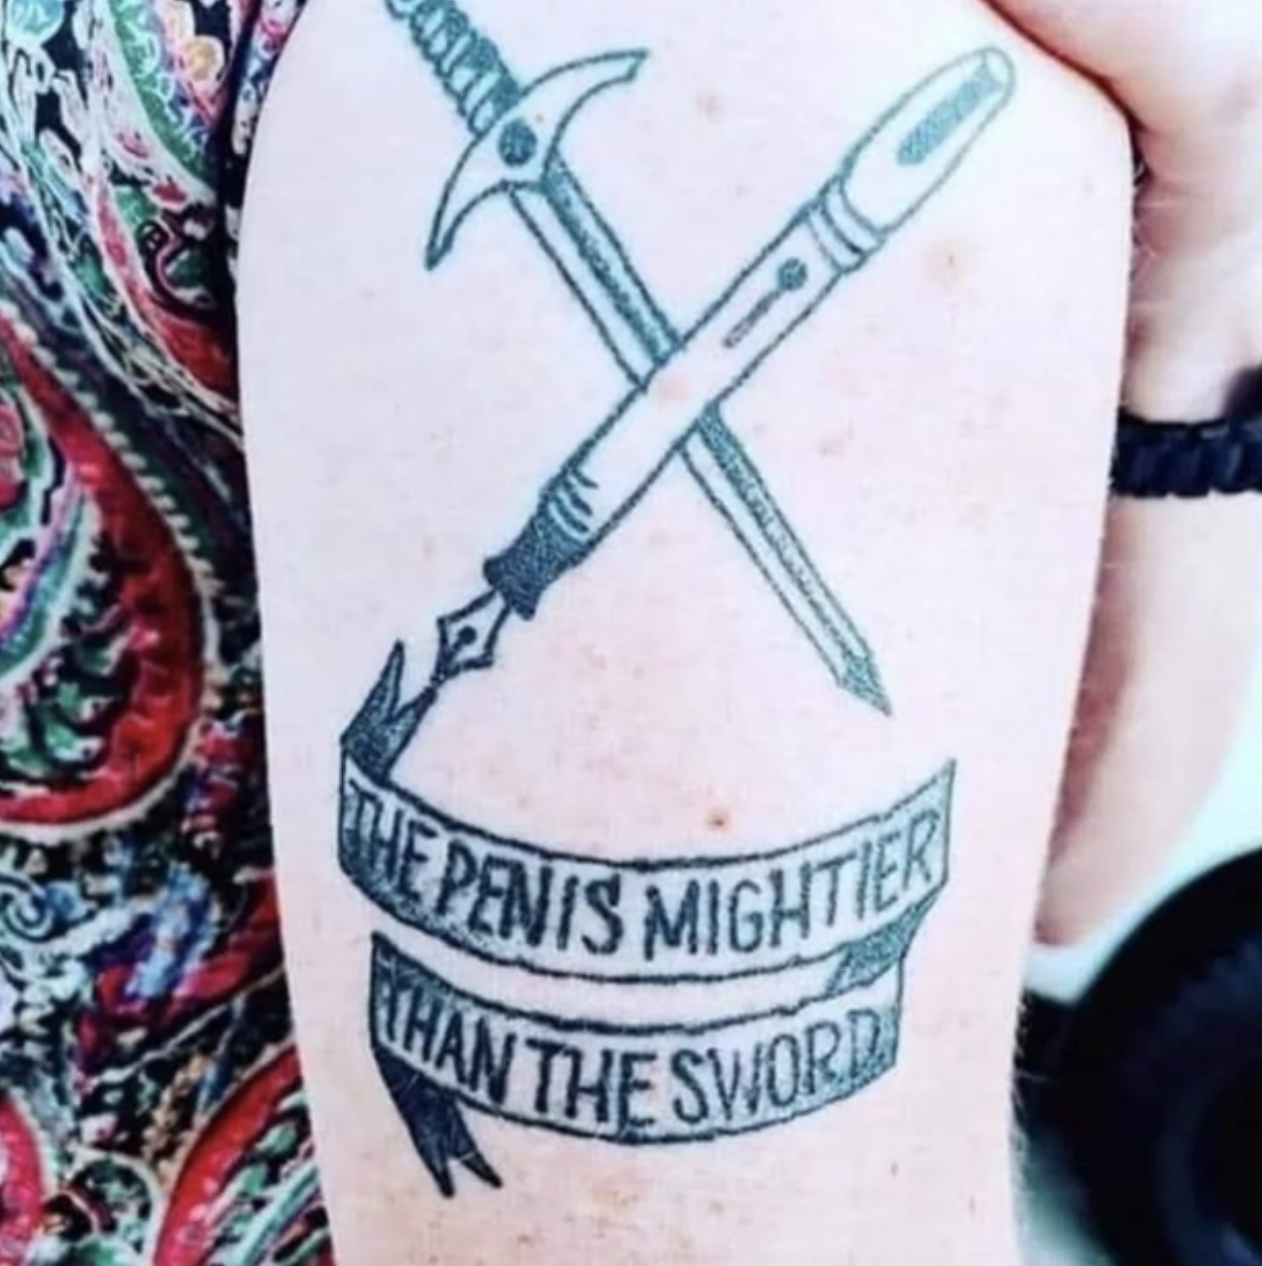 Awful tattoos - penis mightier than the sword -